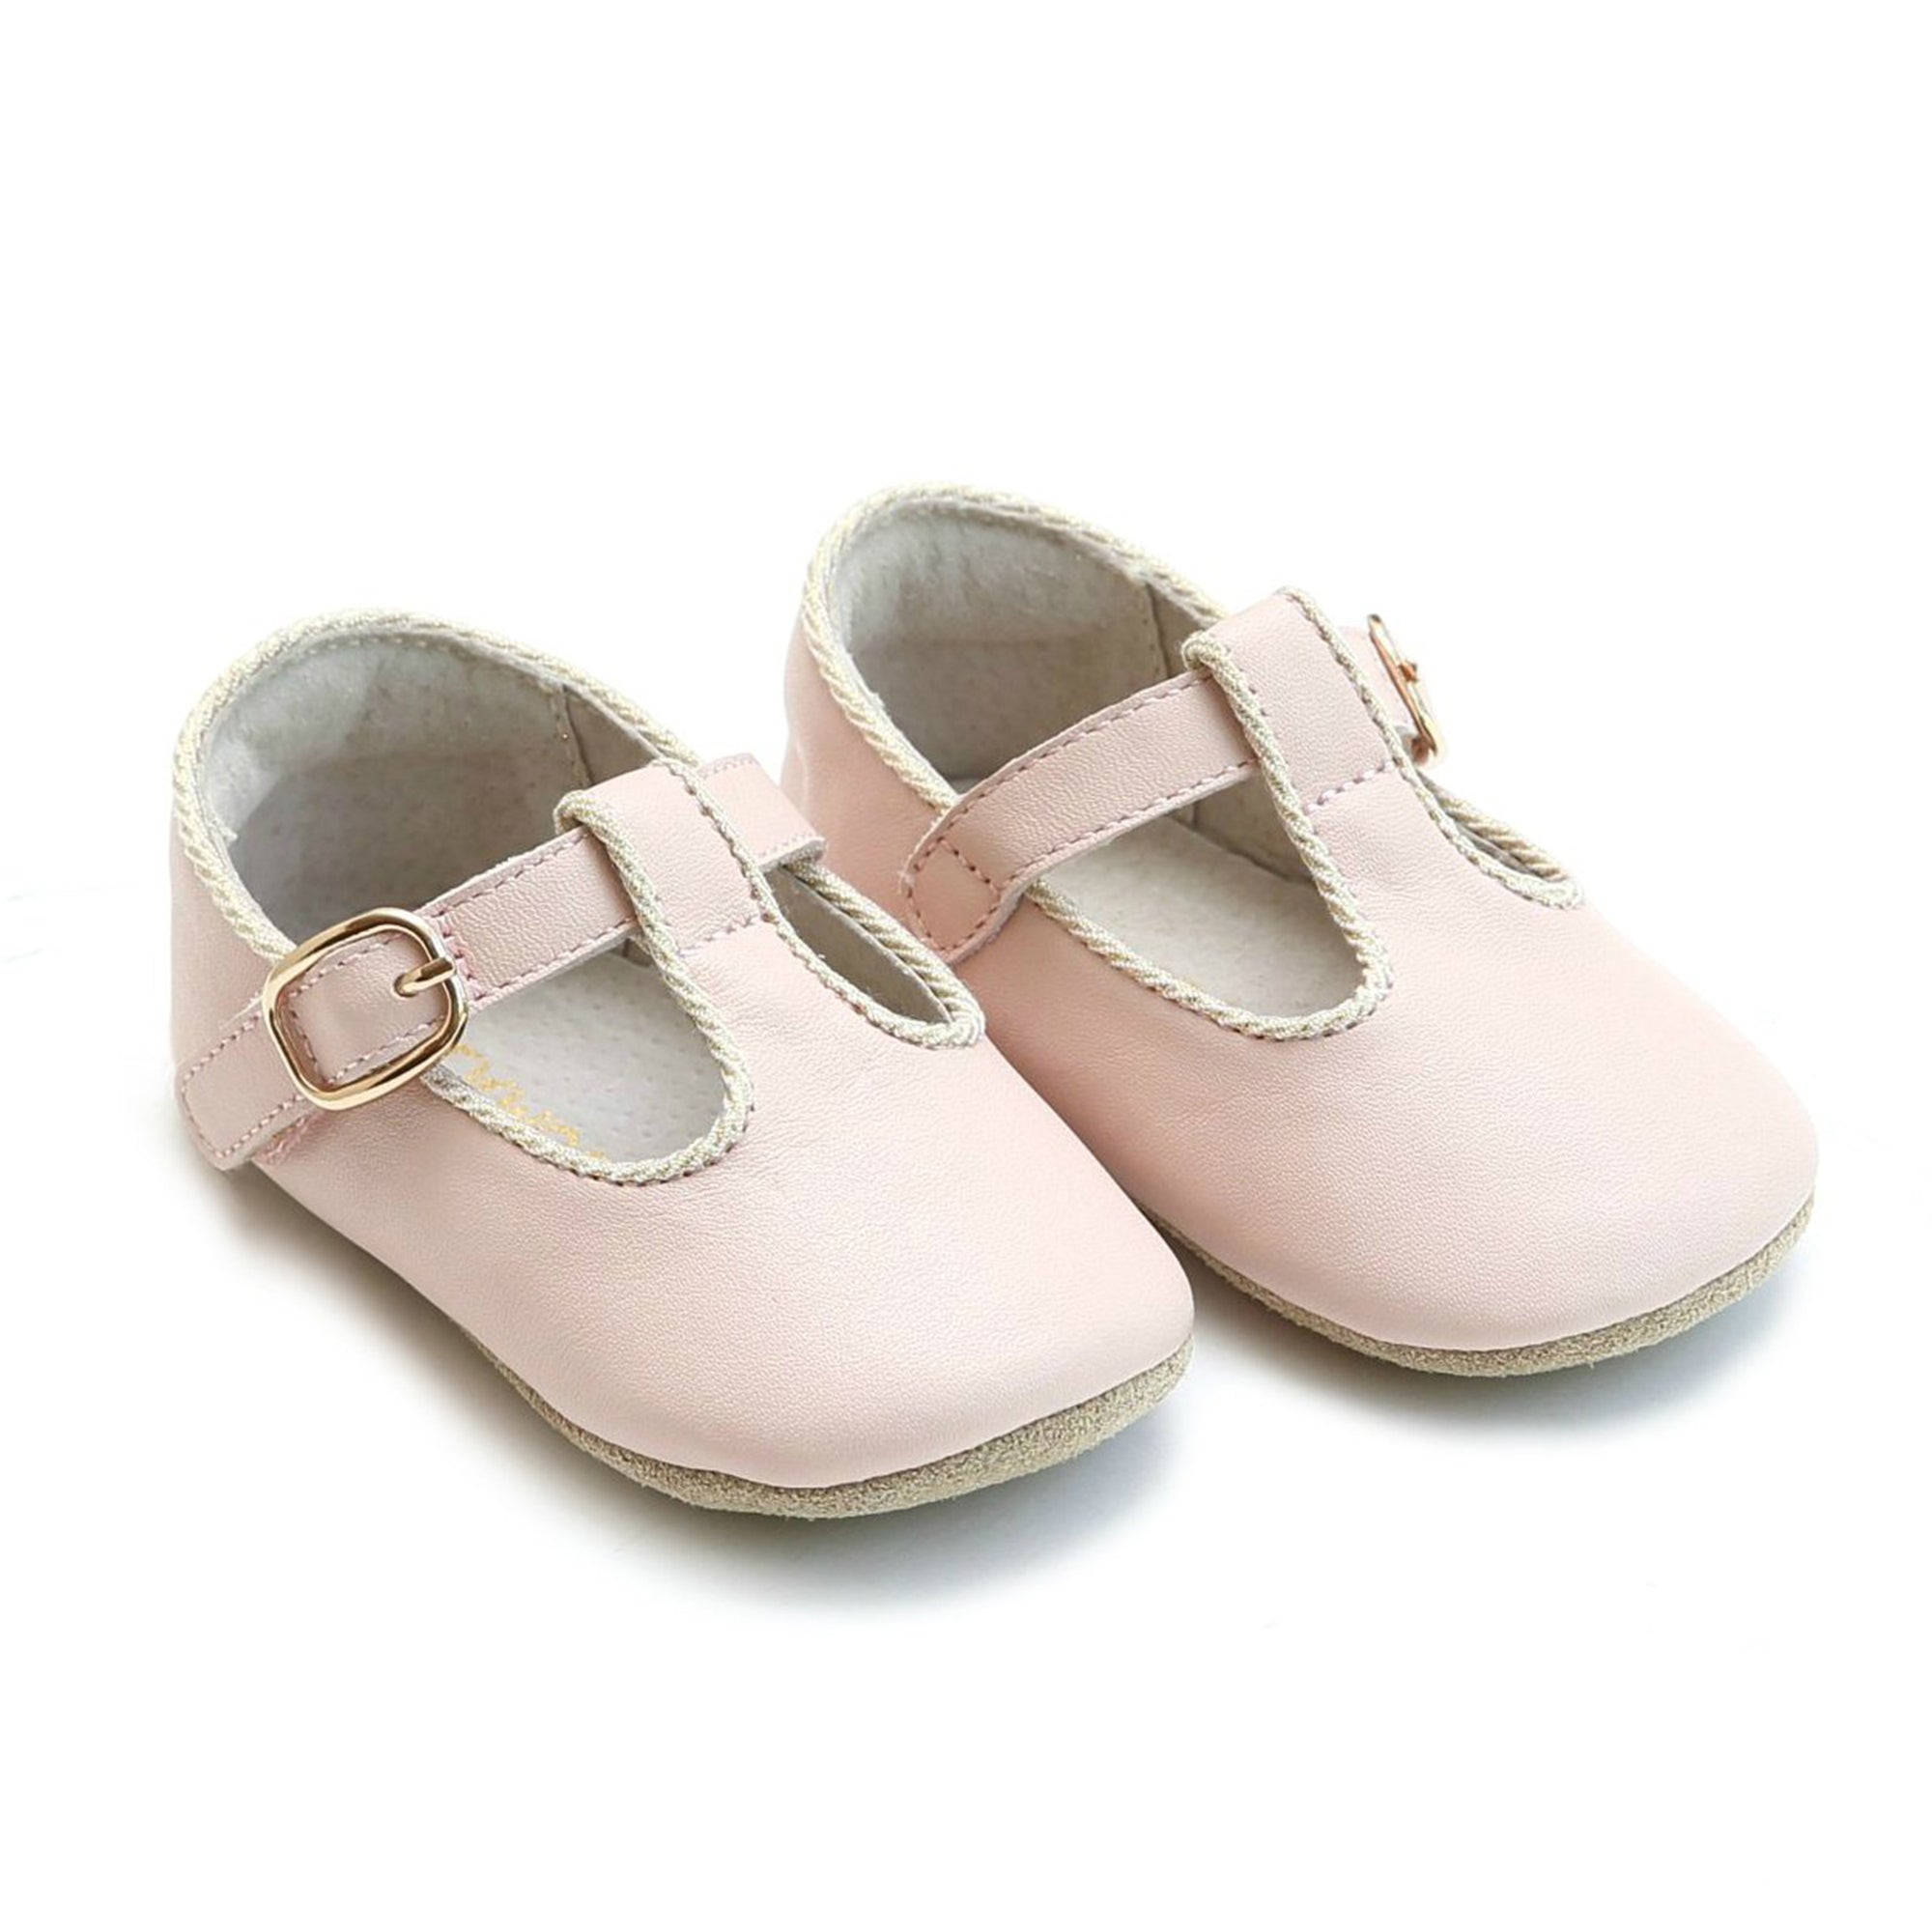 Lamour Baby Girl's Blush Pink Evie Mary Jane Shoes